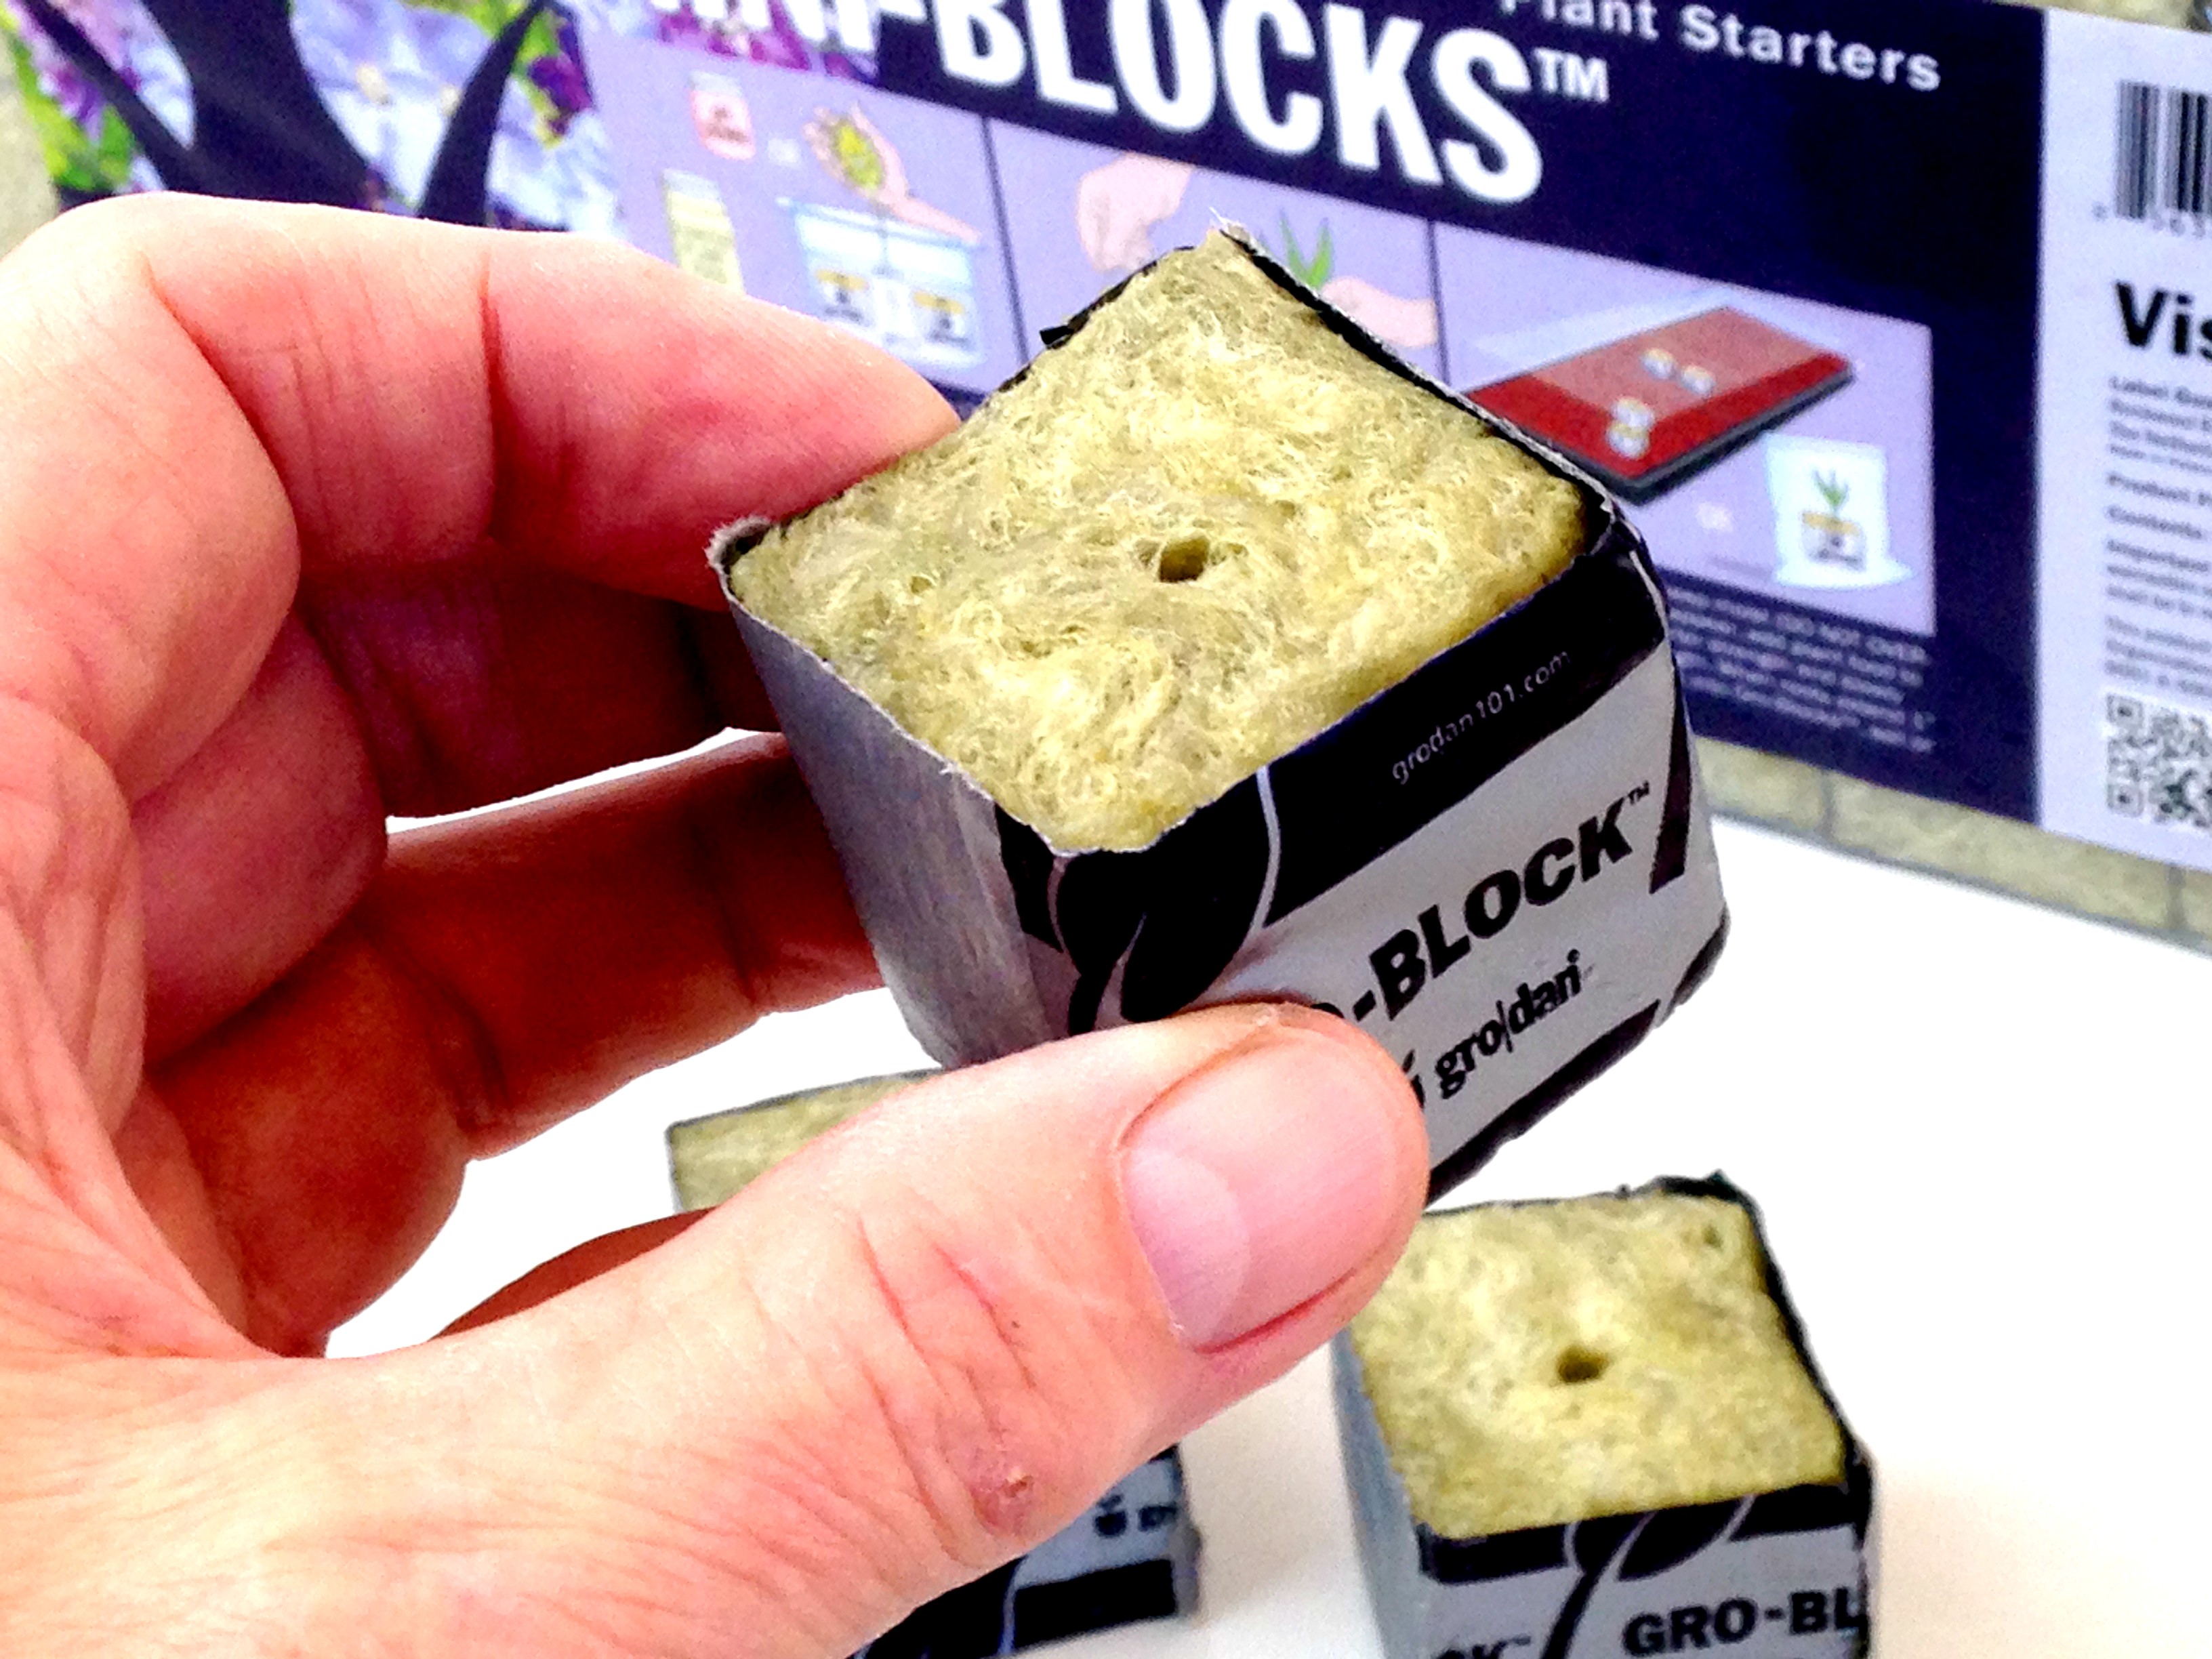 Growing herbs from seeds - Rockwool cubes